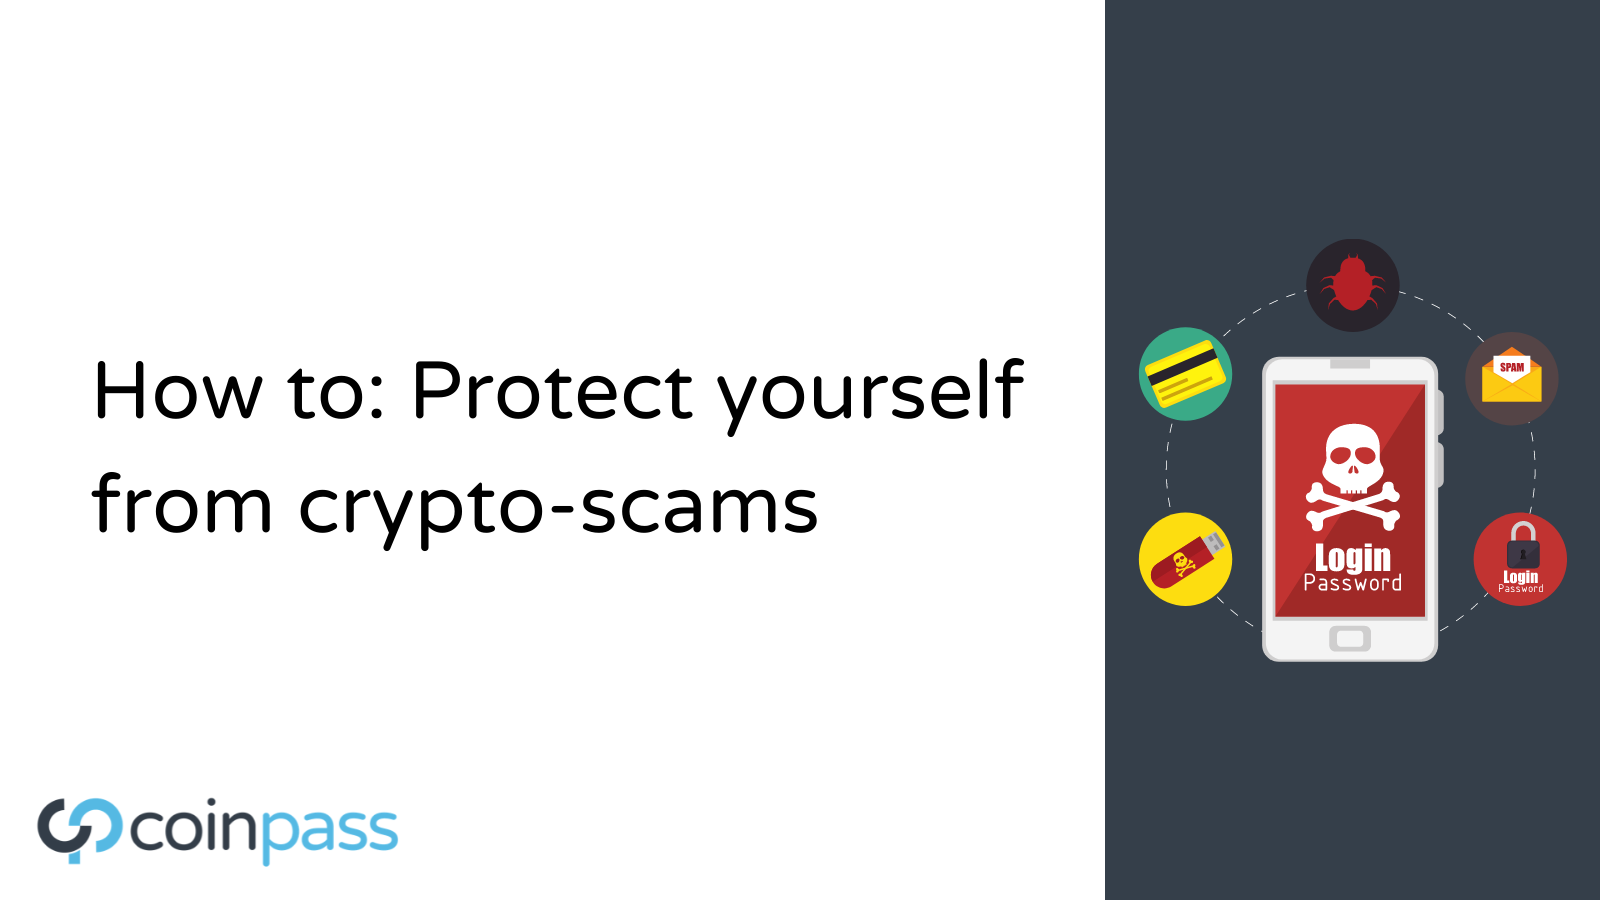 coinpass.com | how to protect yourself from online scams